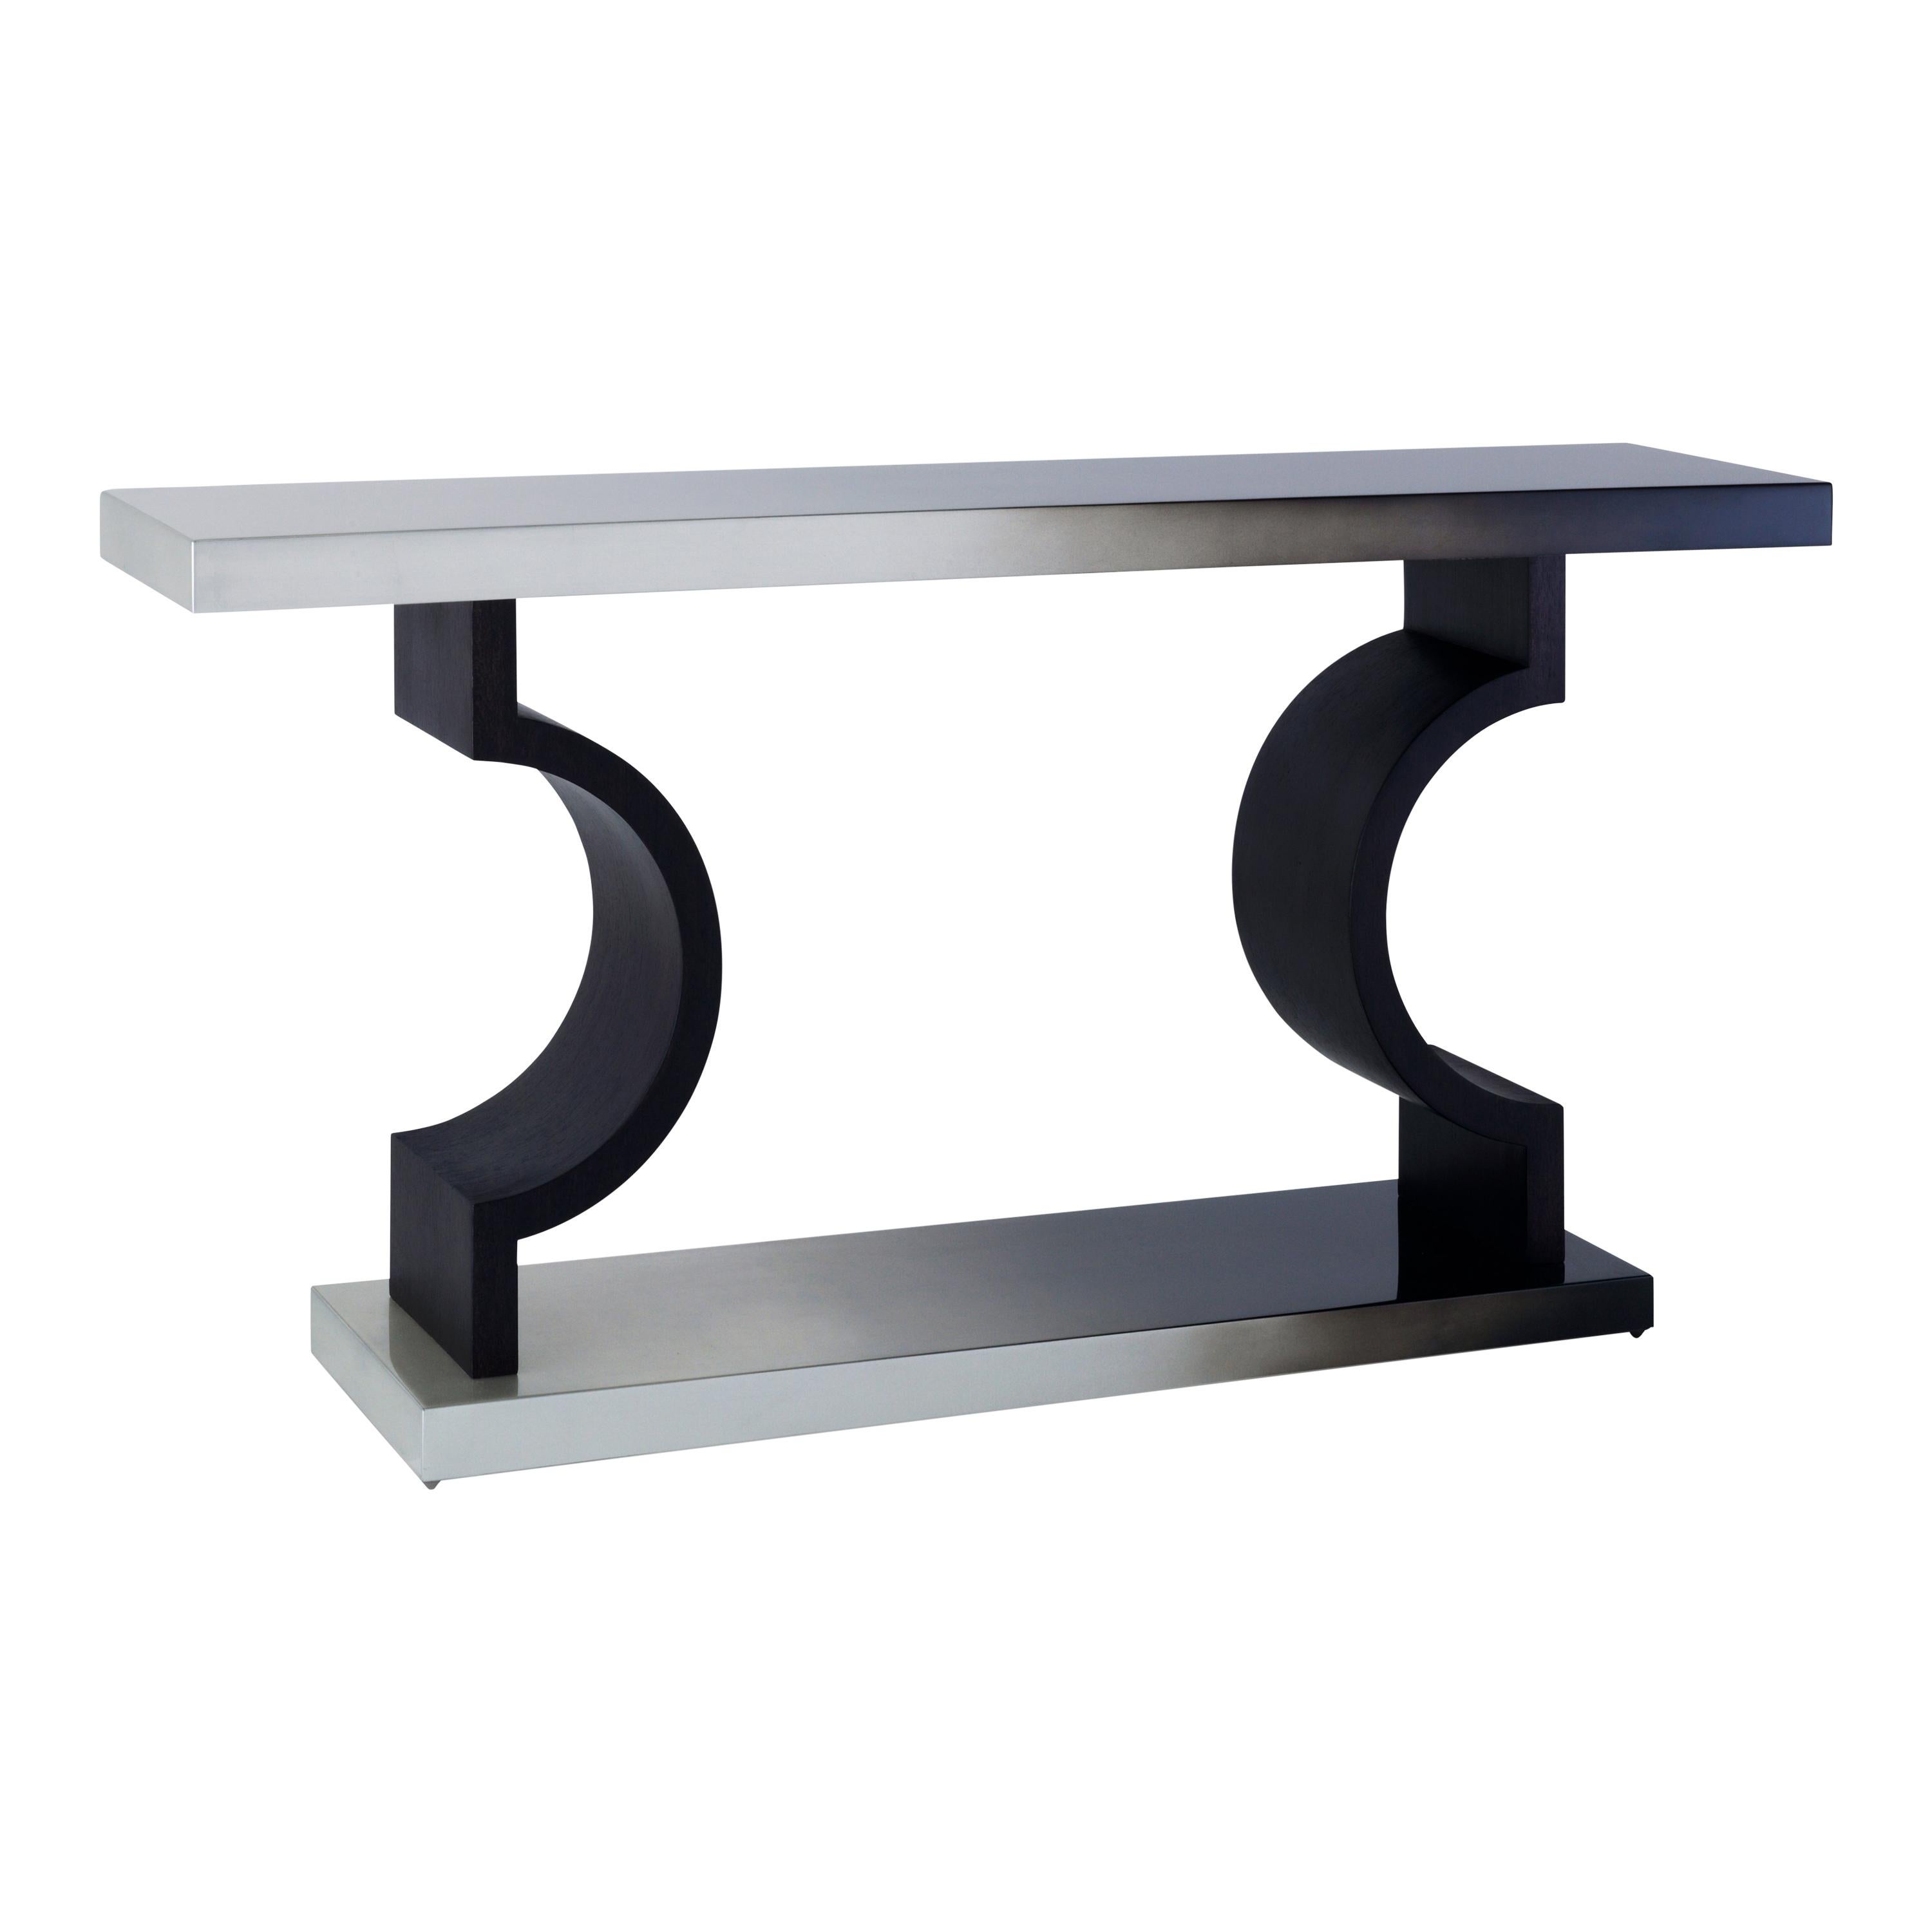 Horizon Console -  Tall Slimline Console with Ombré Leaf Finish For Sale